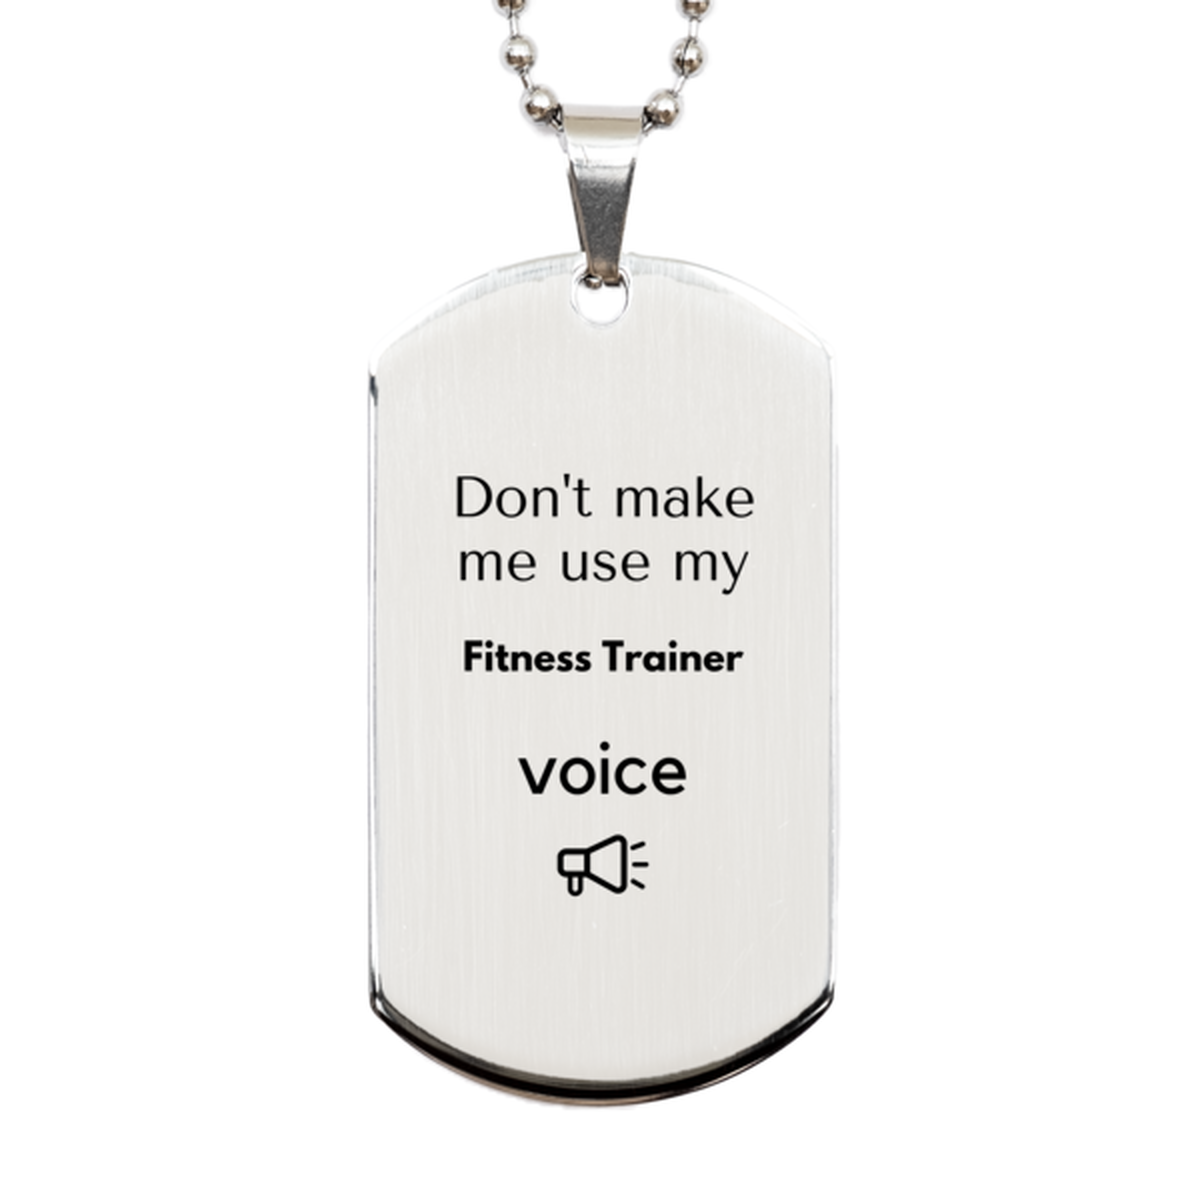 Don't make me use my Fitness Trainer voice, Sarcasm Fitness Trainer Gifts, Christmas Fitness Trainer Silver Dog Tag Birthday Unique Gifts For Fitness Trainer Coworkers, Men, Women, Colleague, Friends